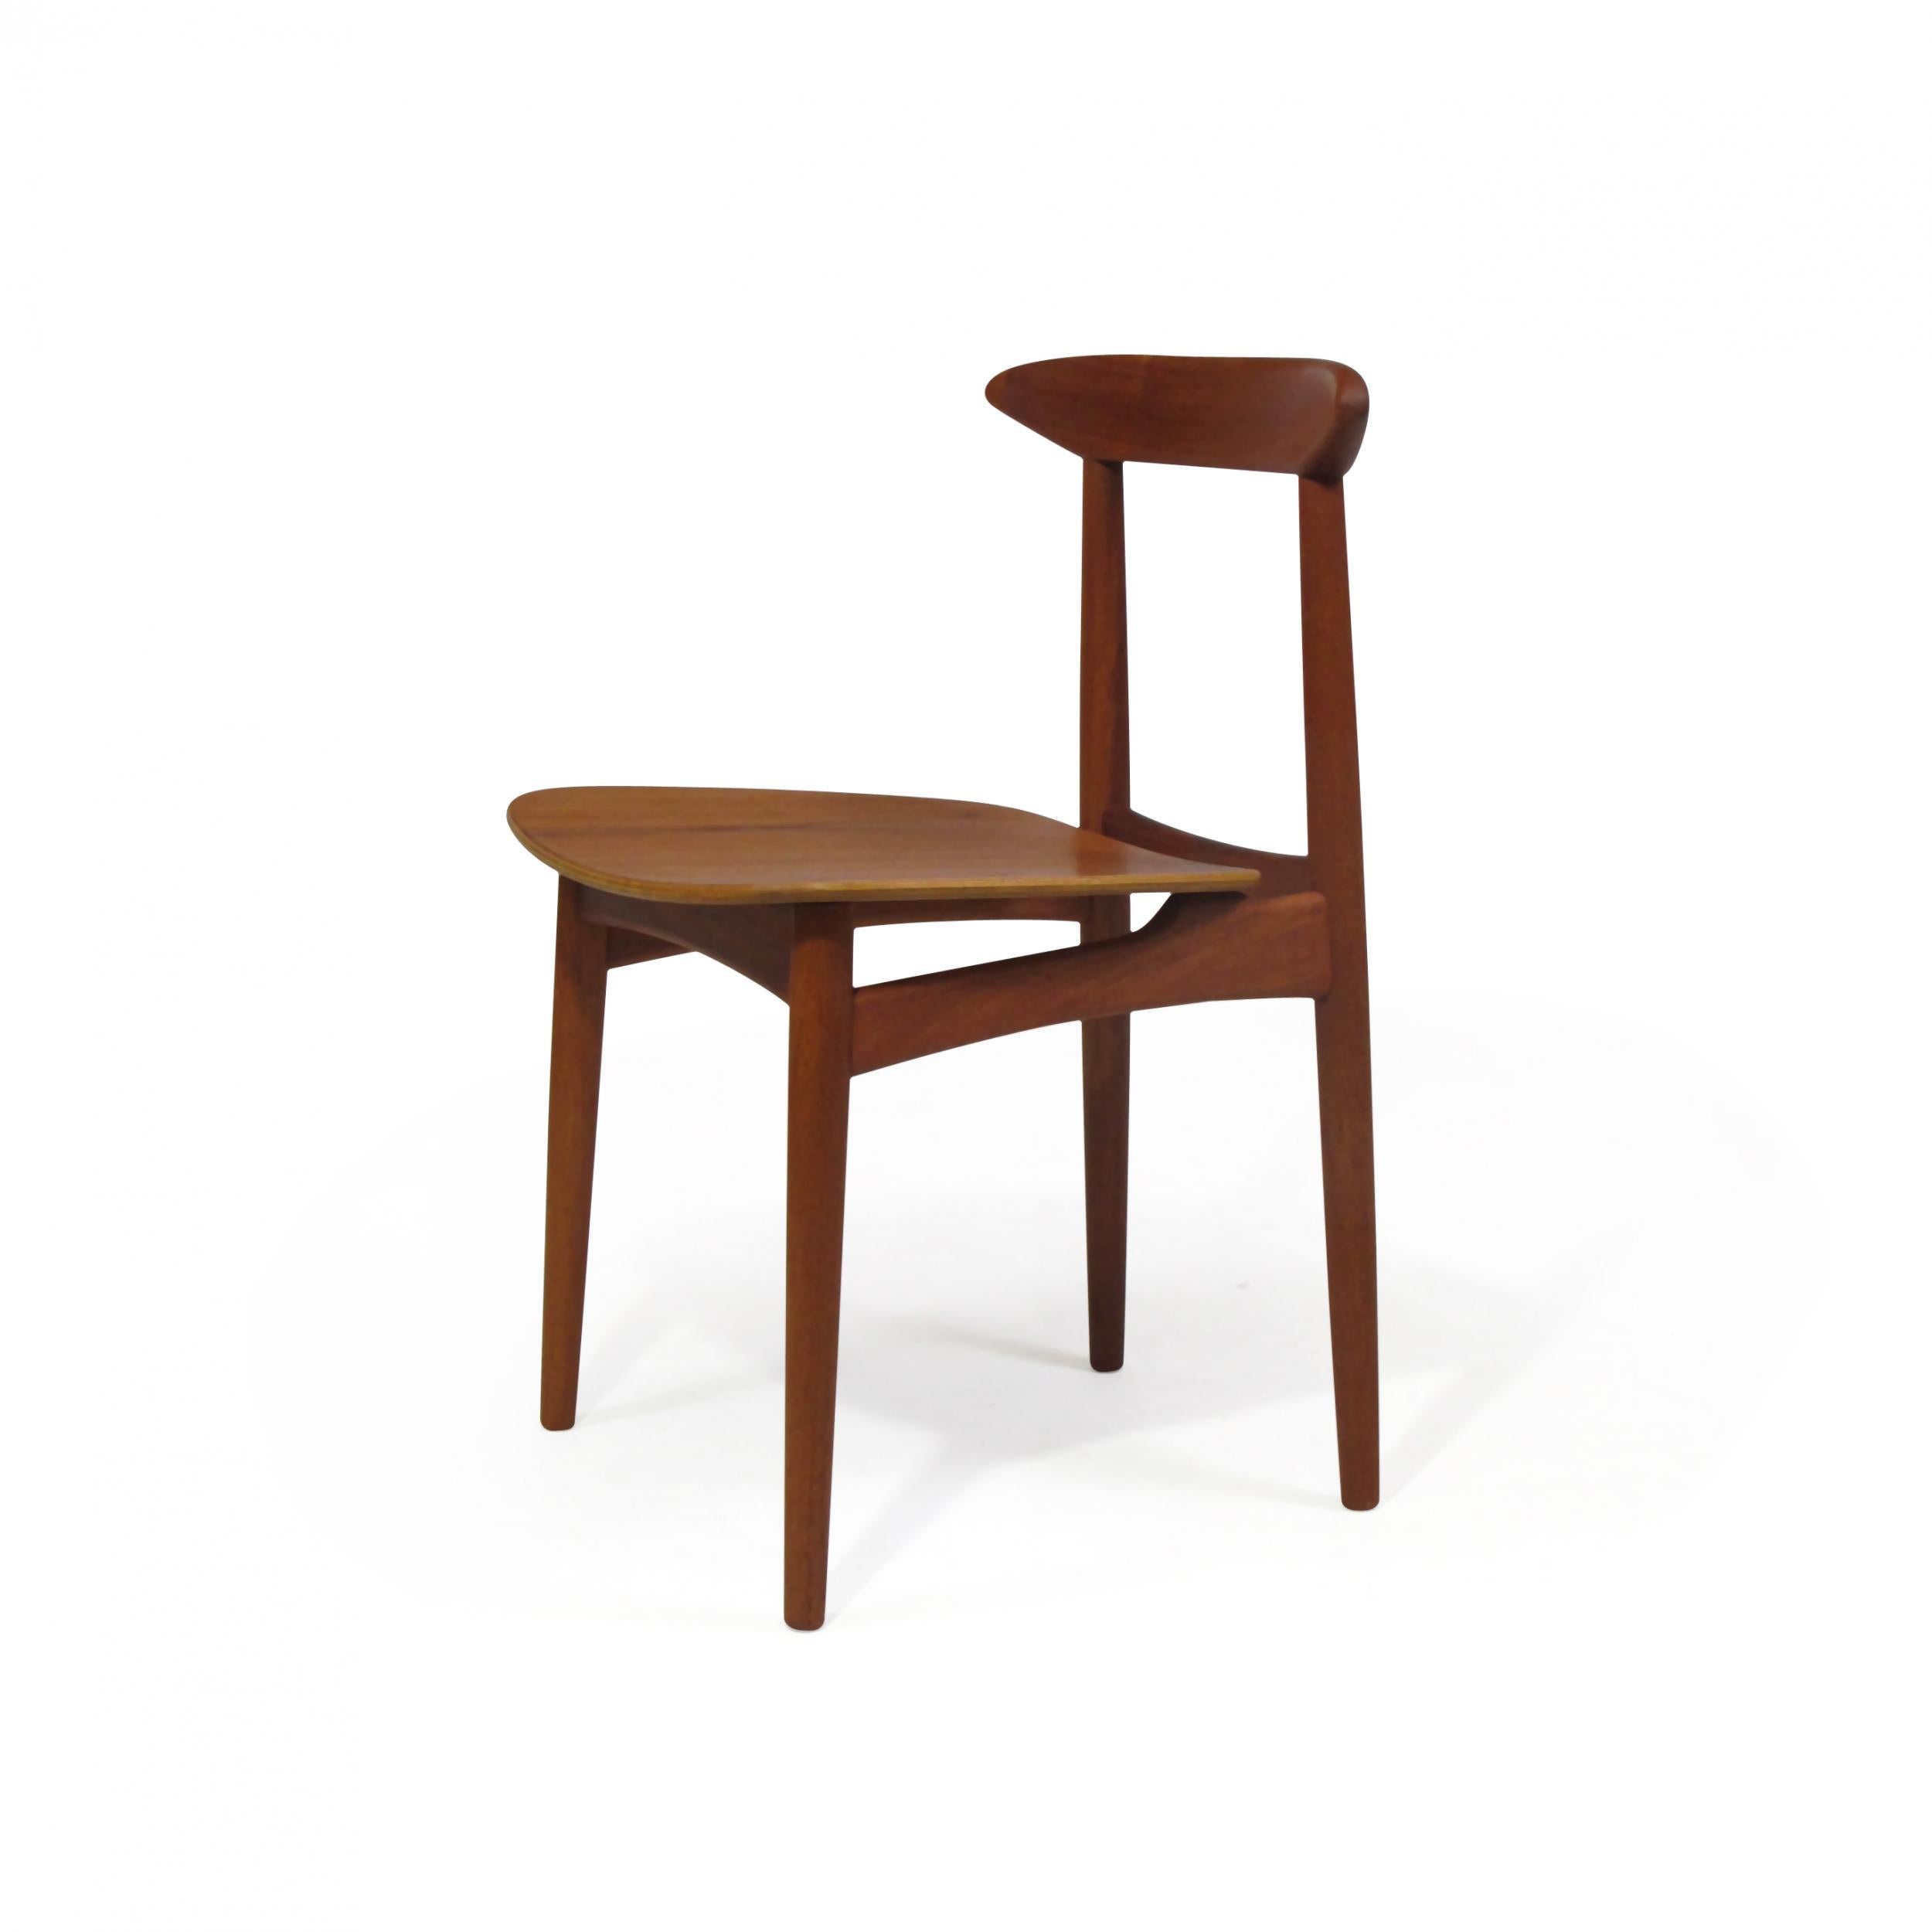 Oiled Danish Teak Dining Chairs with Wooden Seats For Sale